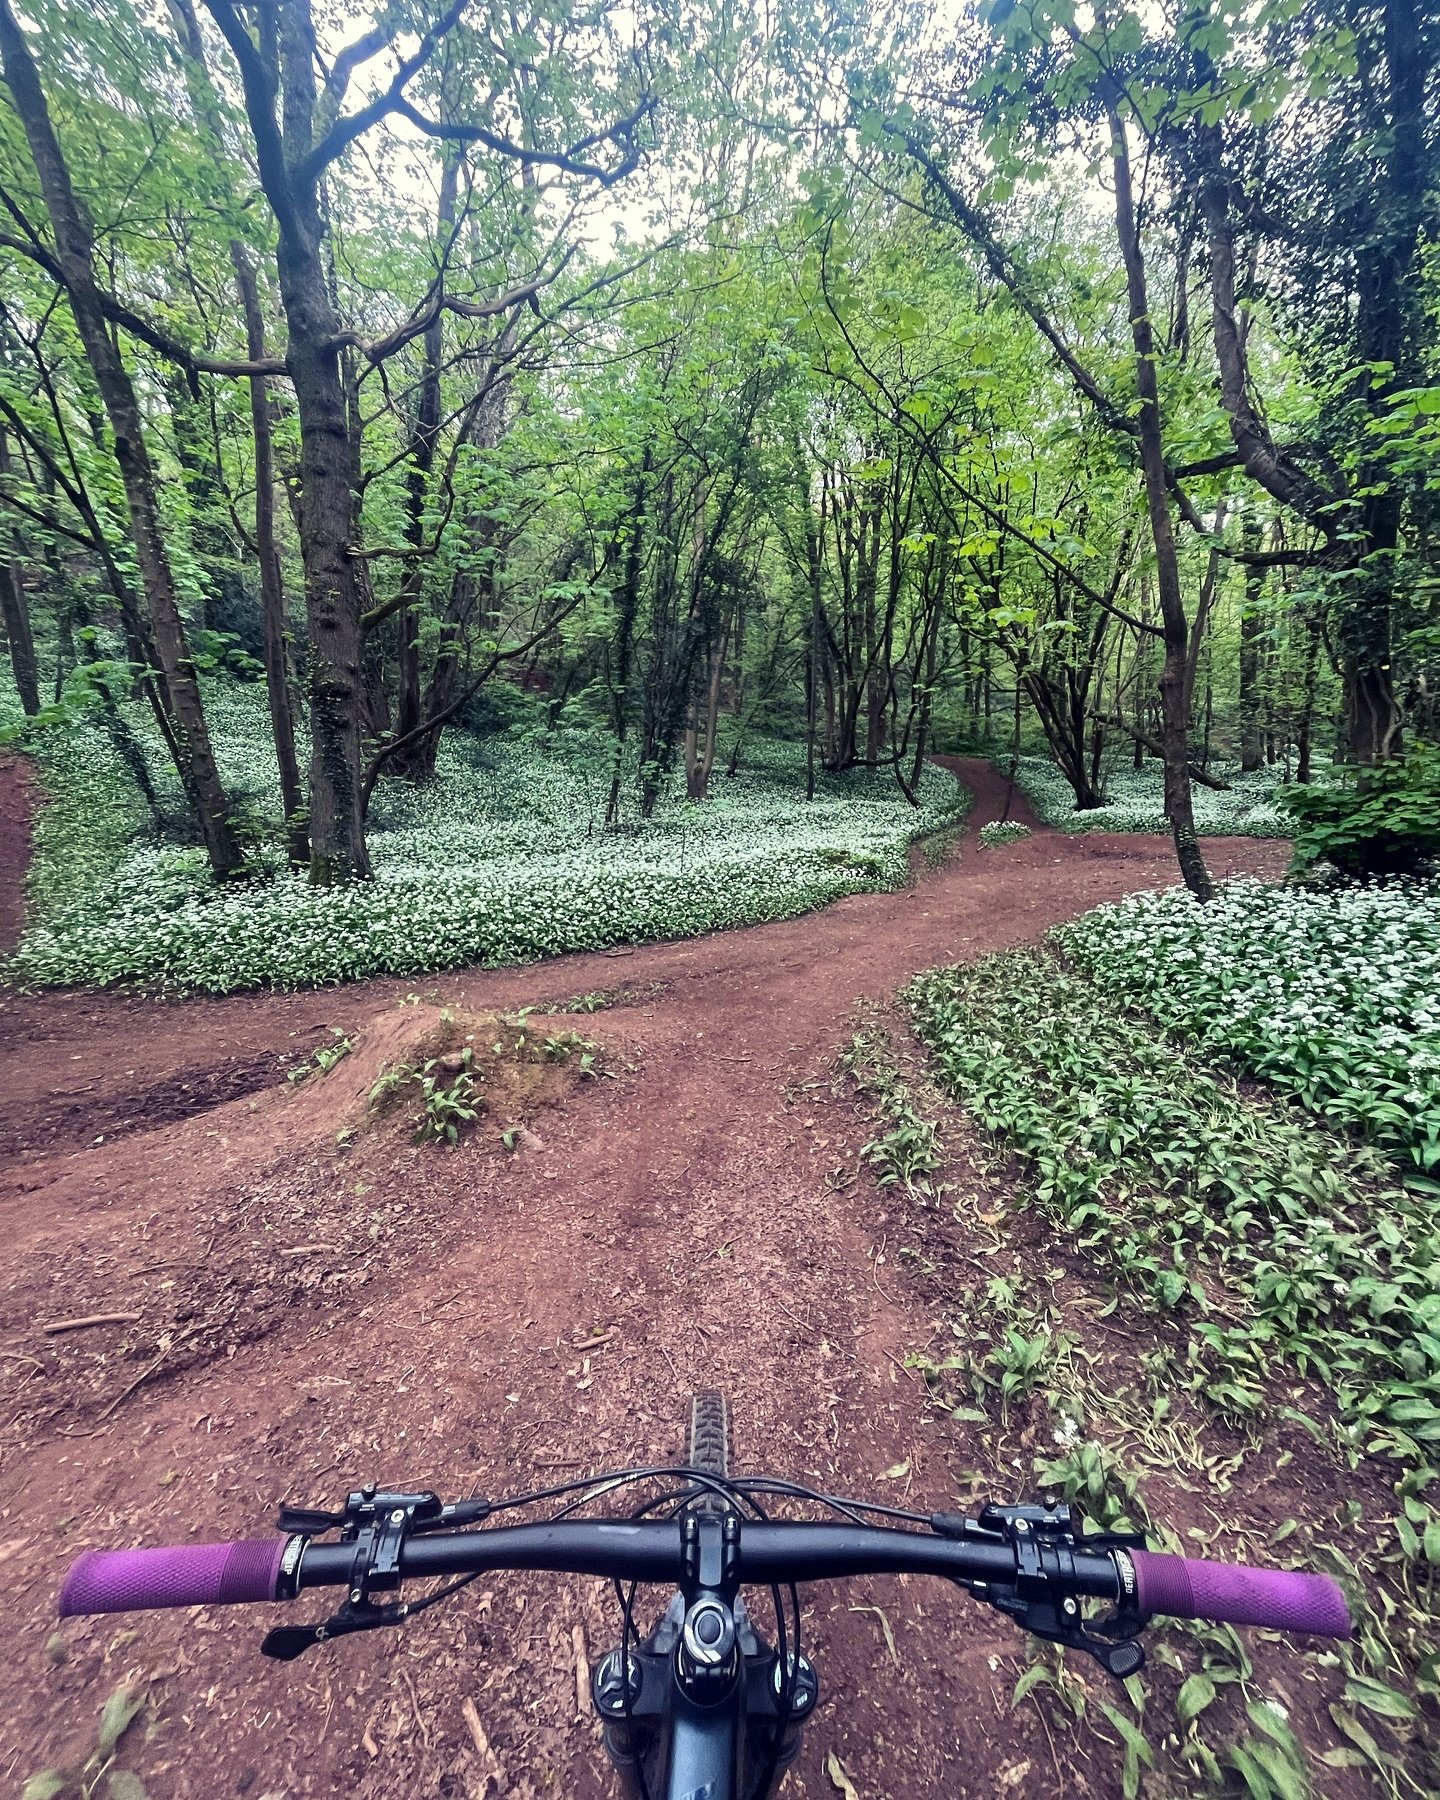 Happy Earth Day! 🌍 

Let&rsquo;s all do our part to be as sustainable as possible so that we can keep enjoying natures playground 🧡

Small changes make a big difference 🌱 🌍 🌲 

#earthday #sustainability #mtb #bristol #letthemride